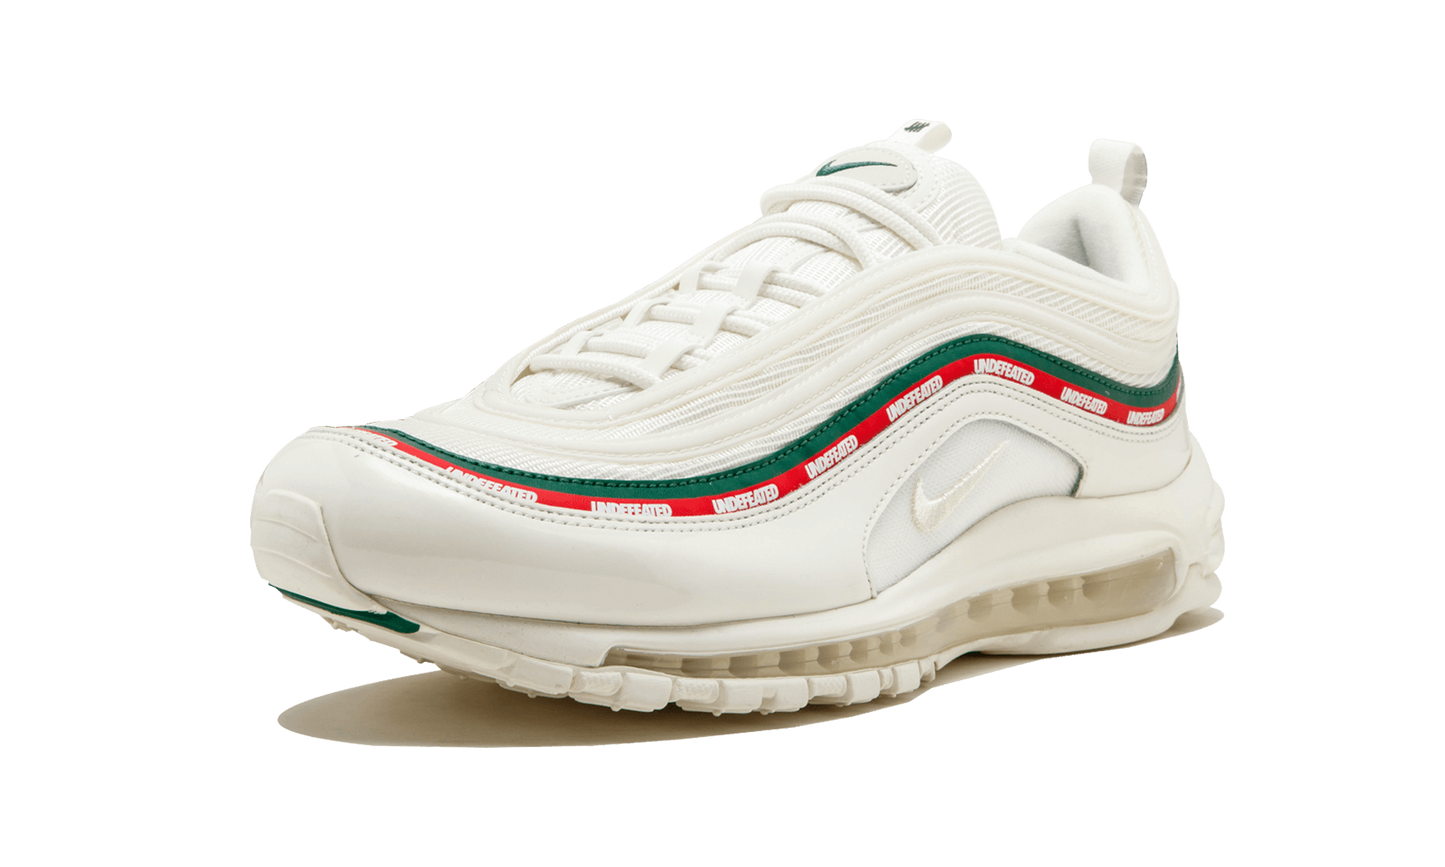 Air Max 97 OG UNDFTD “Undefeated - White”